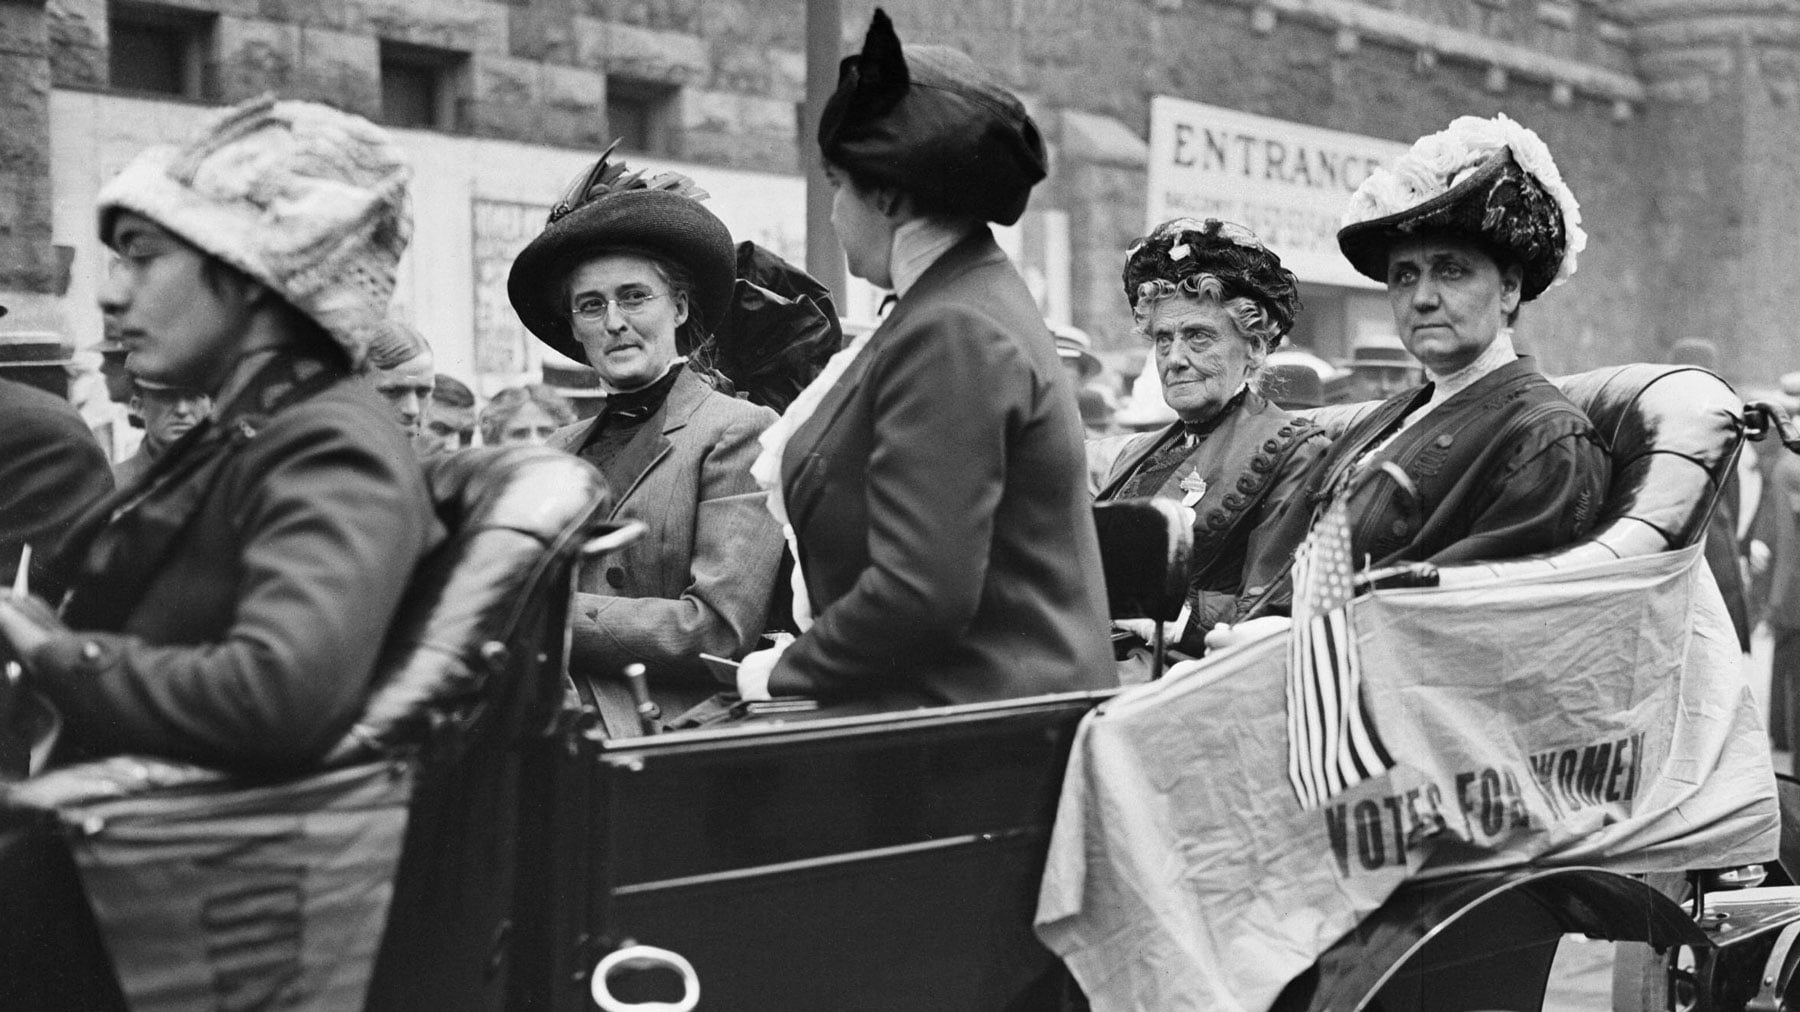 Jane Addams rides in a car in front of the Coliseum during the Republican National Convention of 1912